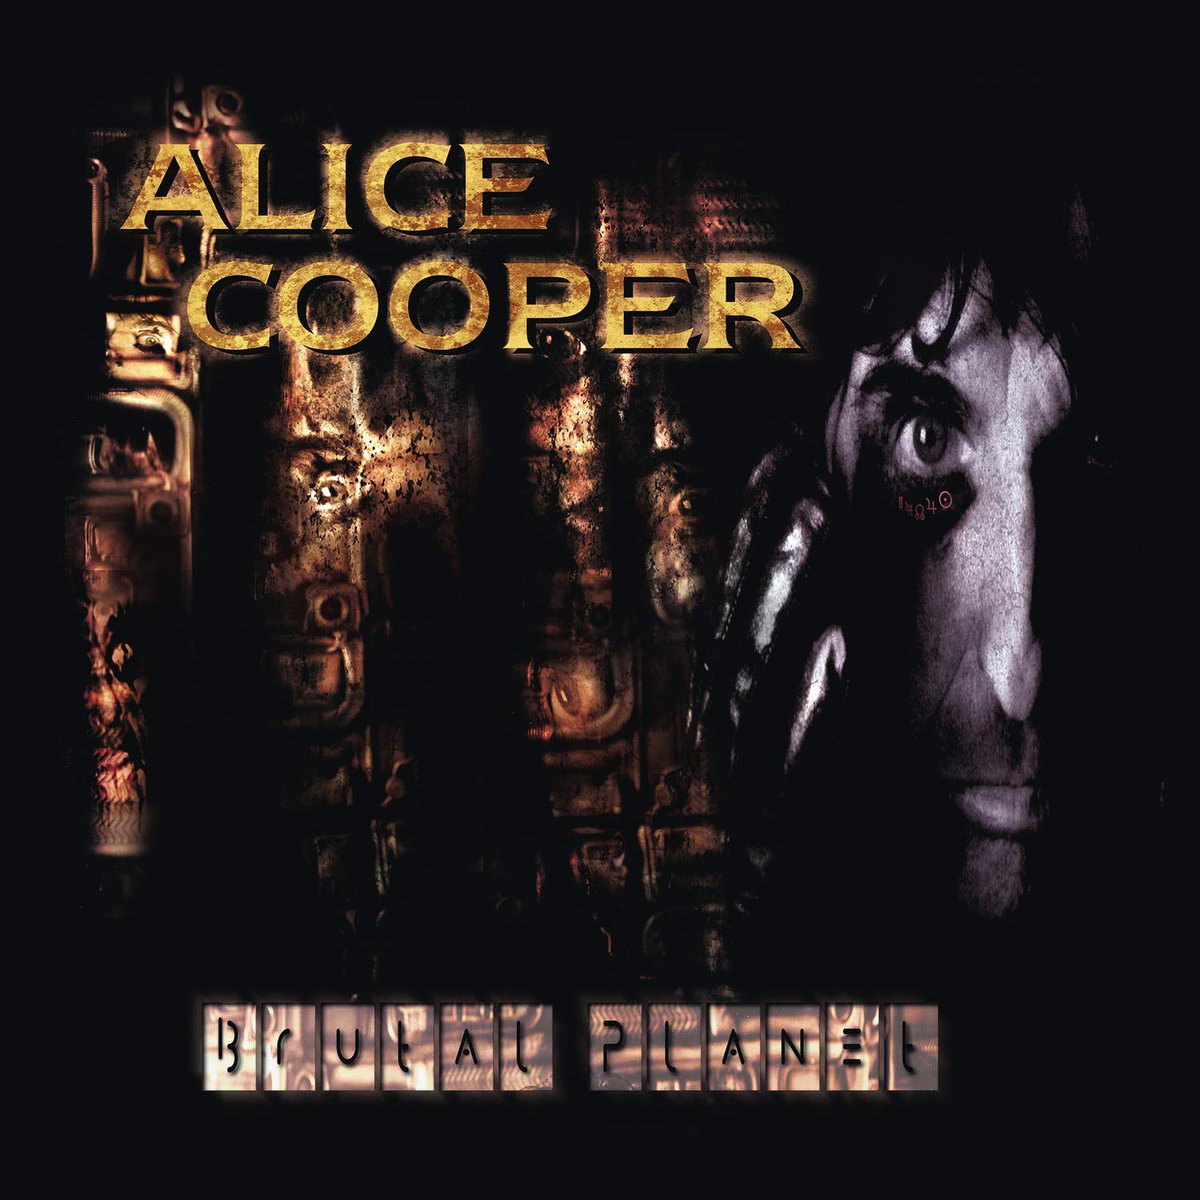 June 6th 2000 #AliceCooper released the album 'Brutal Planet' #TakeItLikeAWoman #PickUpTheBones #BlowMeAKiss #EatSomeMore #HeavyMetal Did you know... The album featured Ryan Roxie on guitar, Eric Singer on drums, and bassist Bob Marlette.